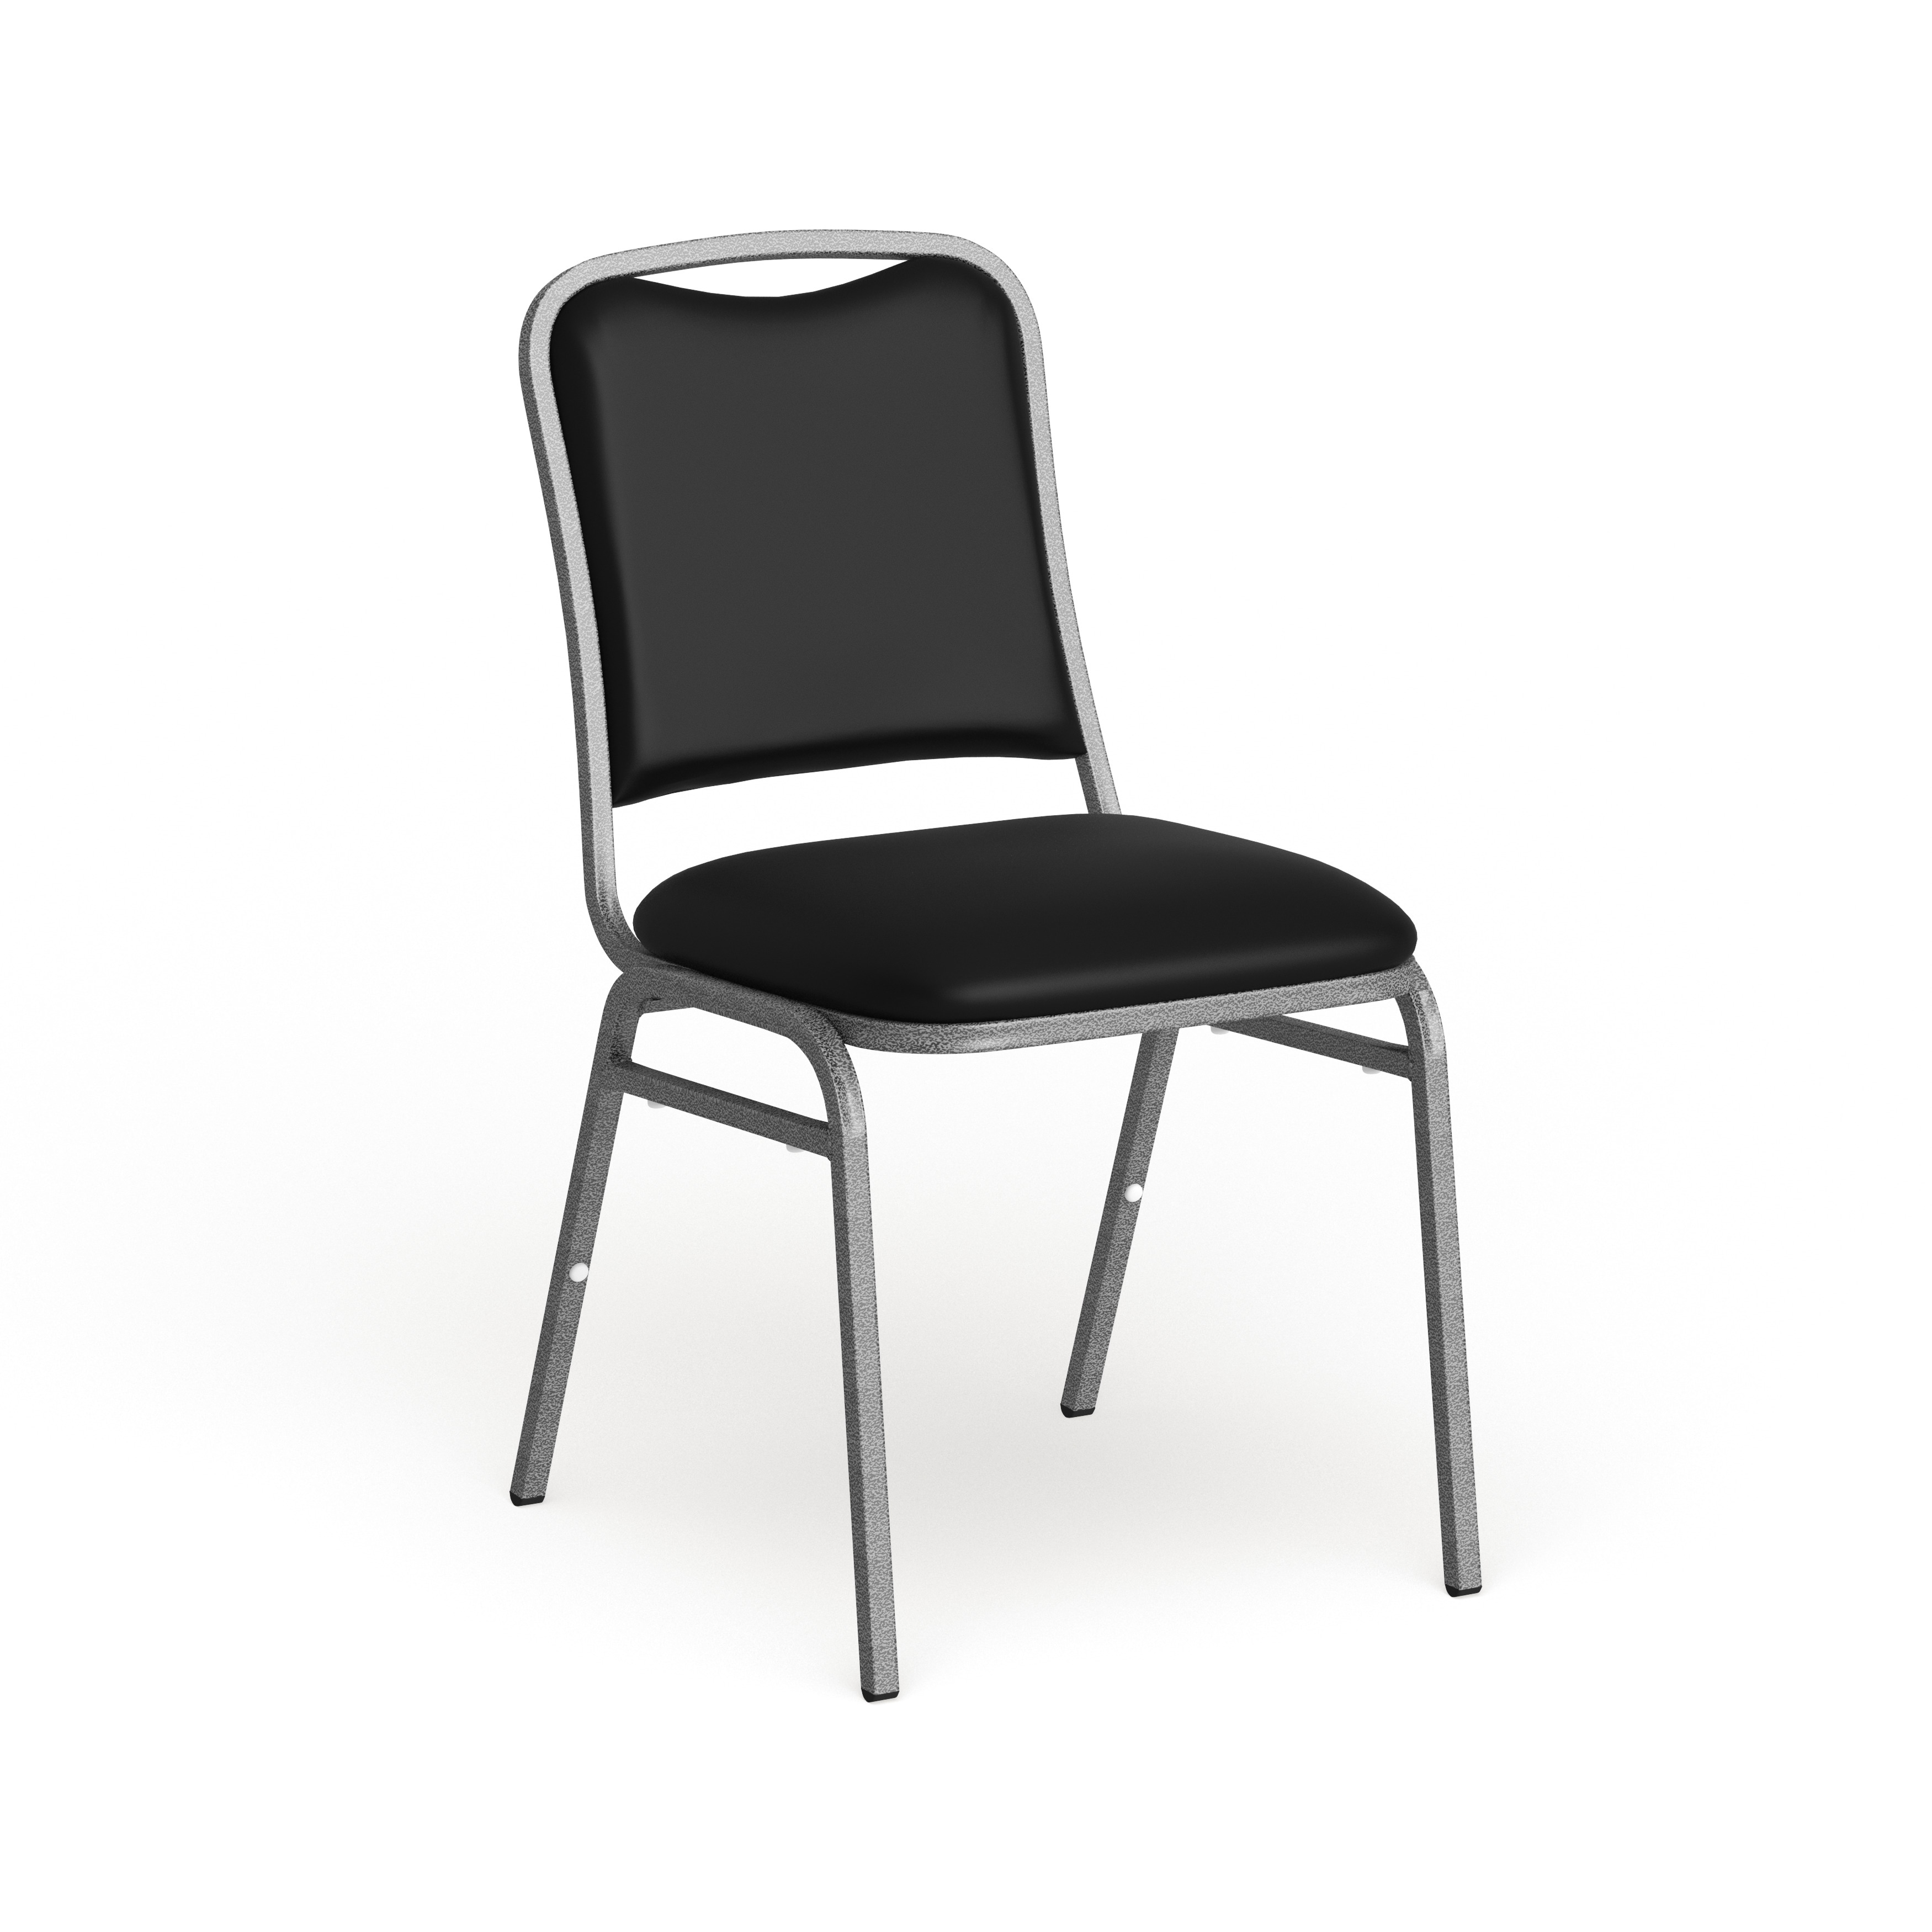 Lancaster Home Angled Back Stacking Banquet Chair in Vinyl